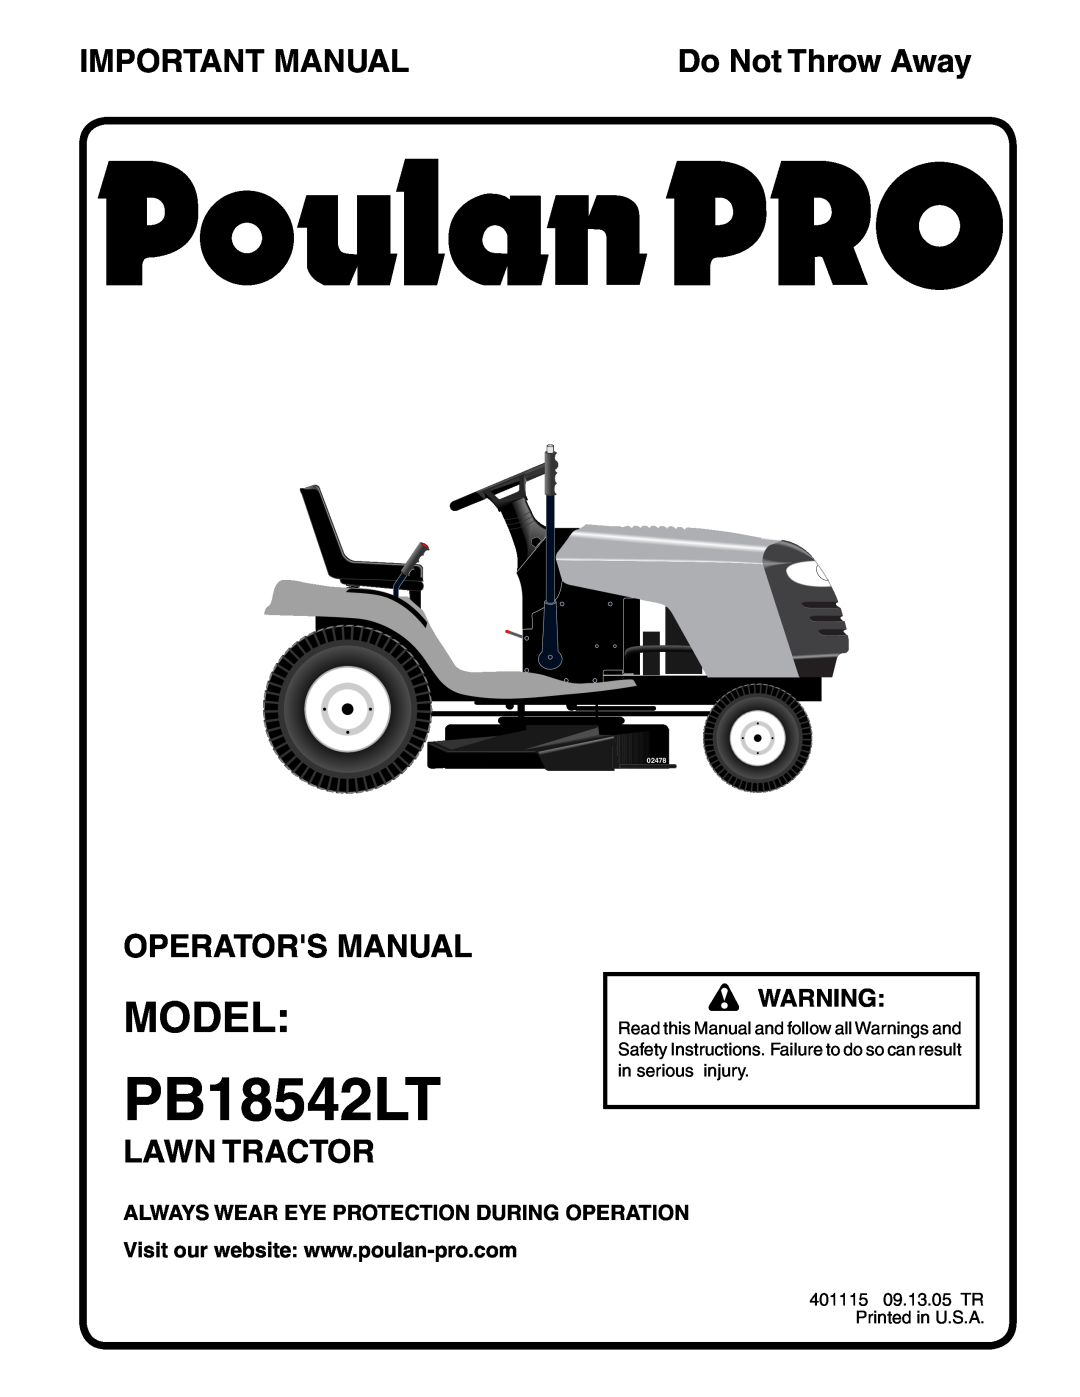 Poulan 401115 manual Model, Important Manual, Operators Manual, Lawn Tractor, Always Wear Eye Protection During Operation 